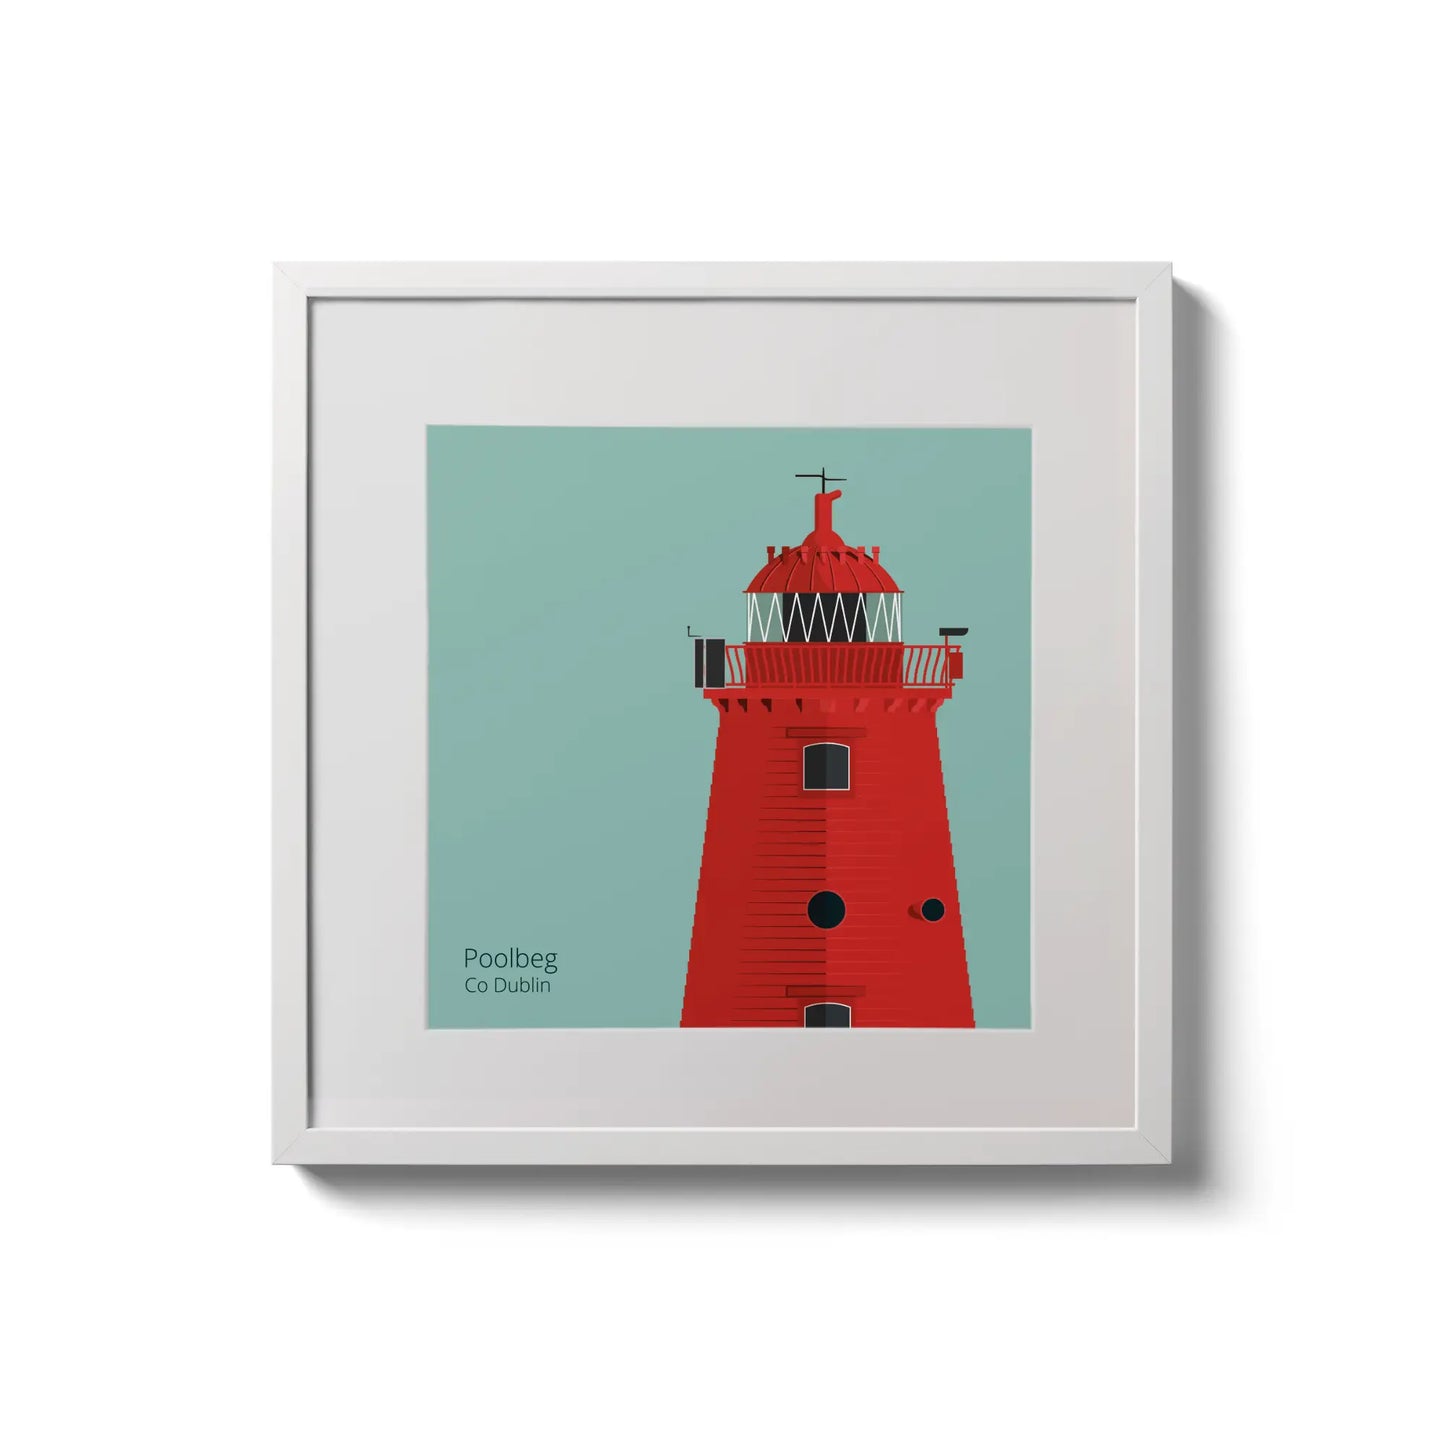 Illustration of Poolbeg lighthouse on an ocean green background,  in a white square frame measuring 20x20cm.